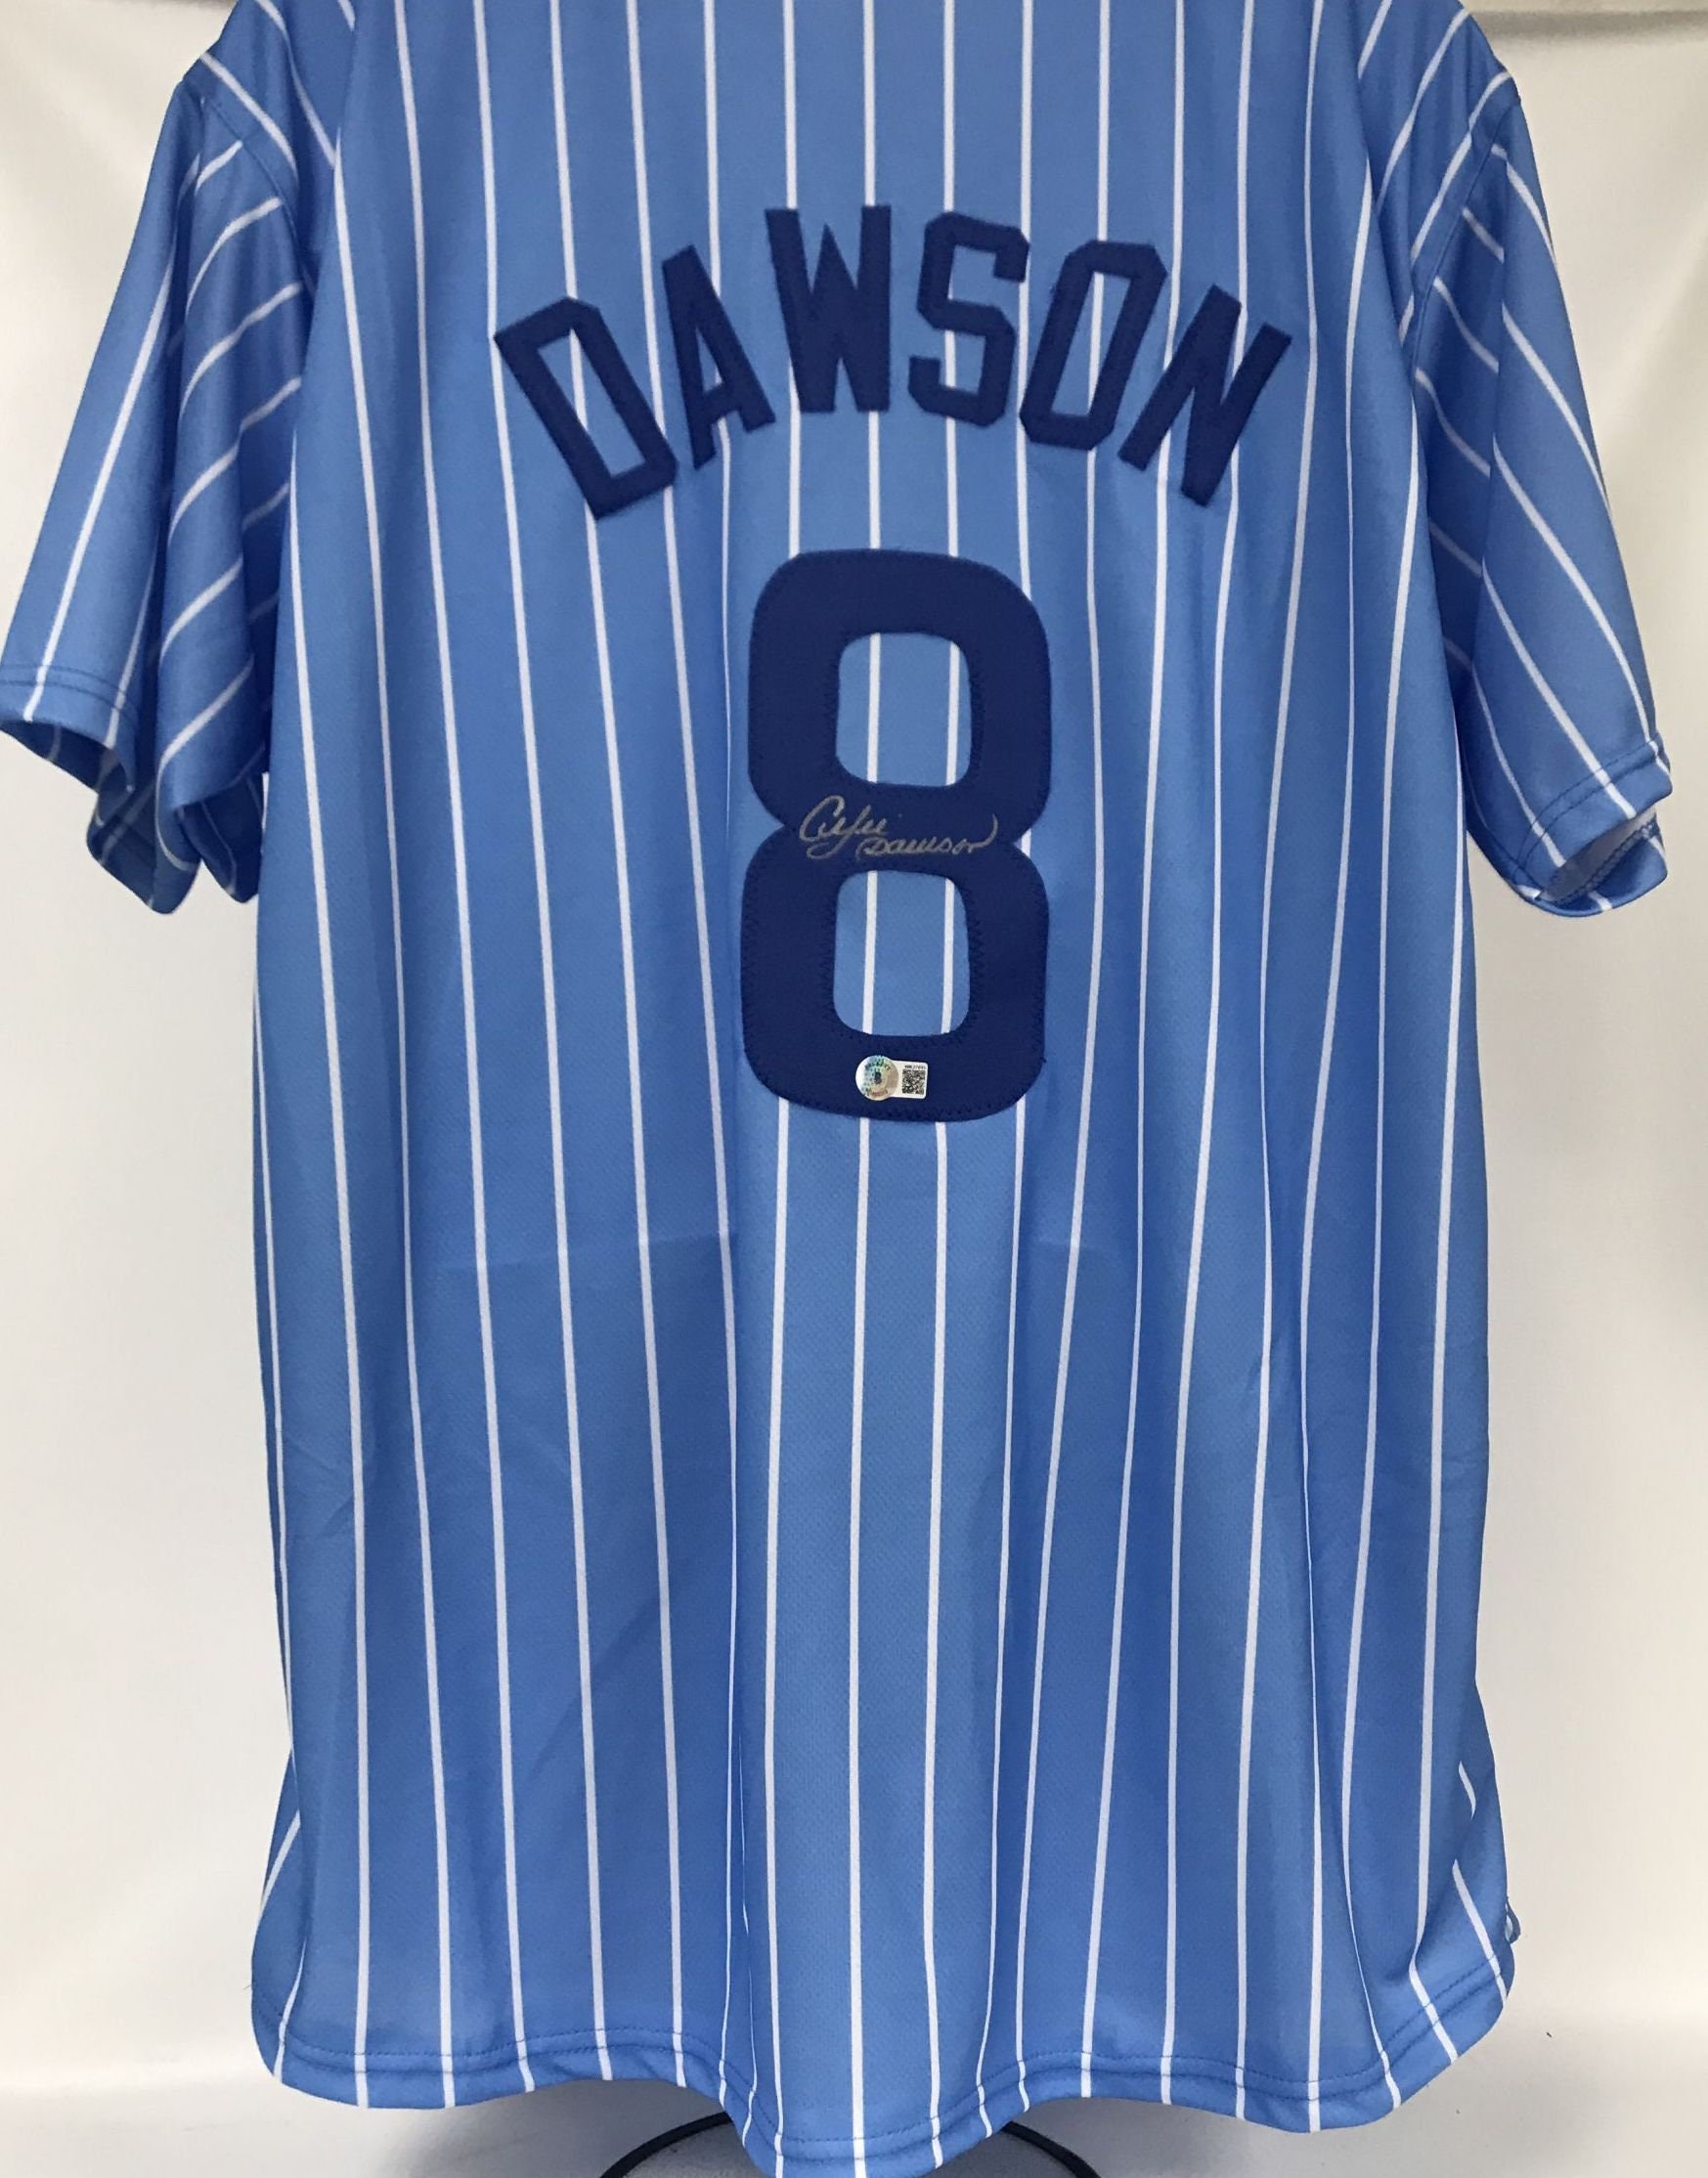 Buy Andre Dawson Signed Autographed Chicago Blue Pinstripe Online in India  